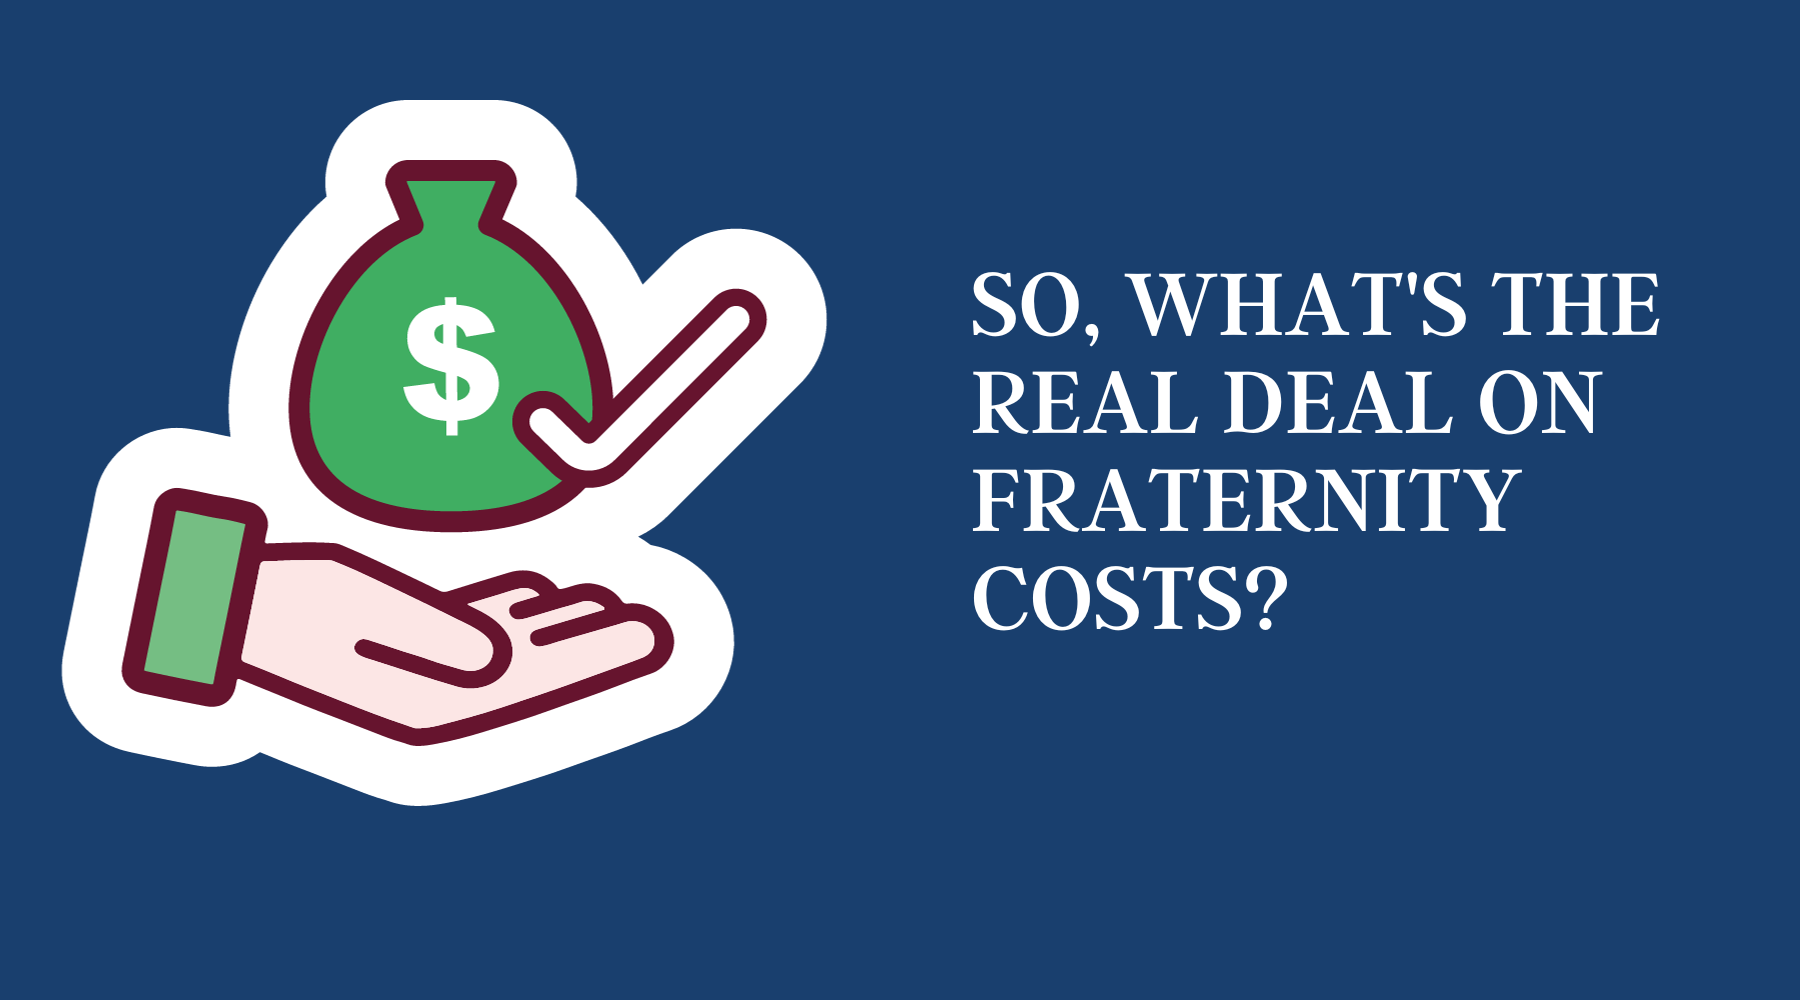 So, What's the Real Deal on Fraternity Costs?